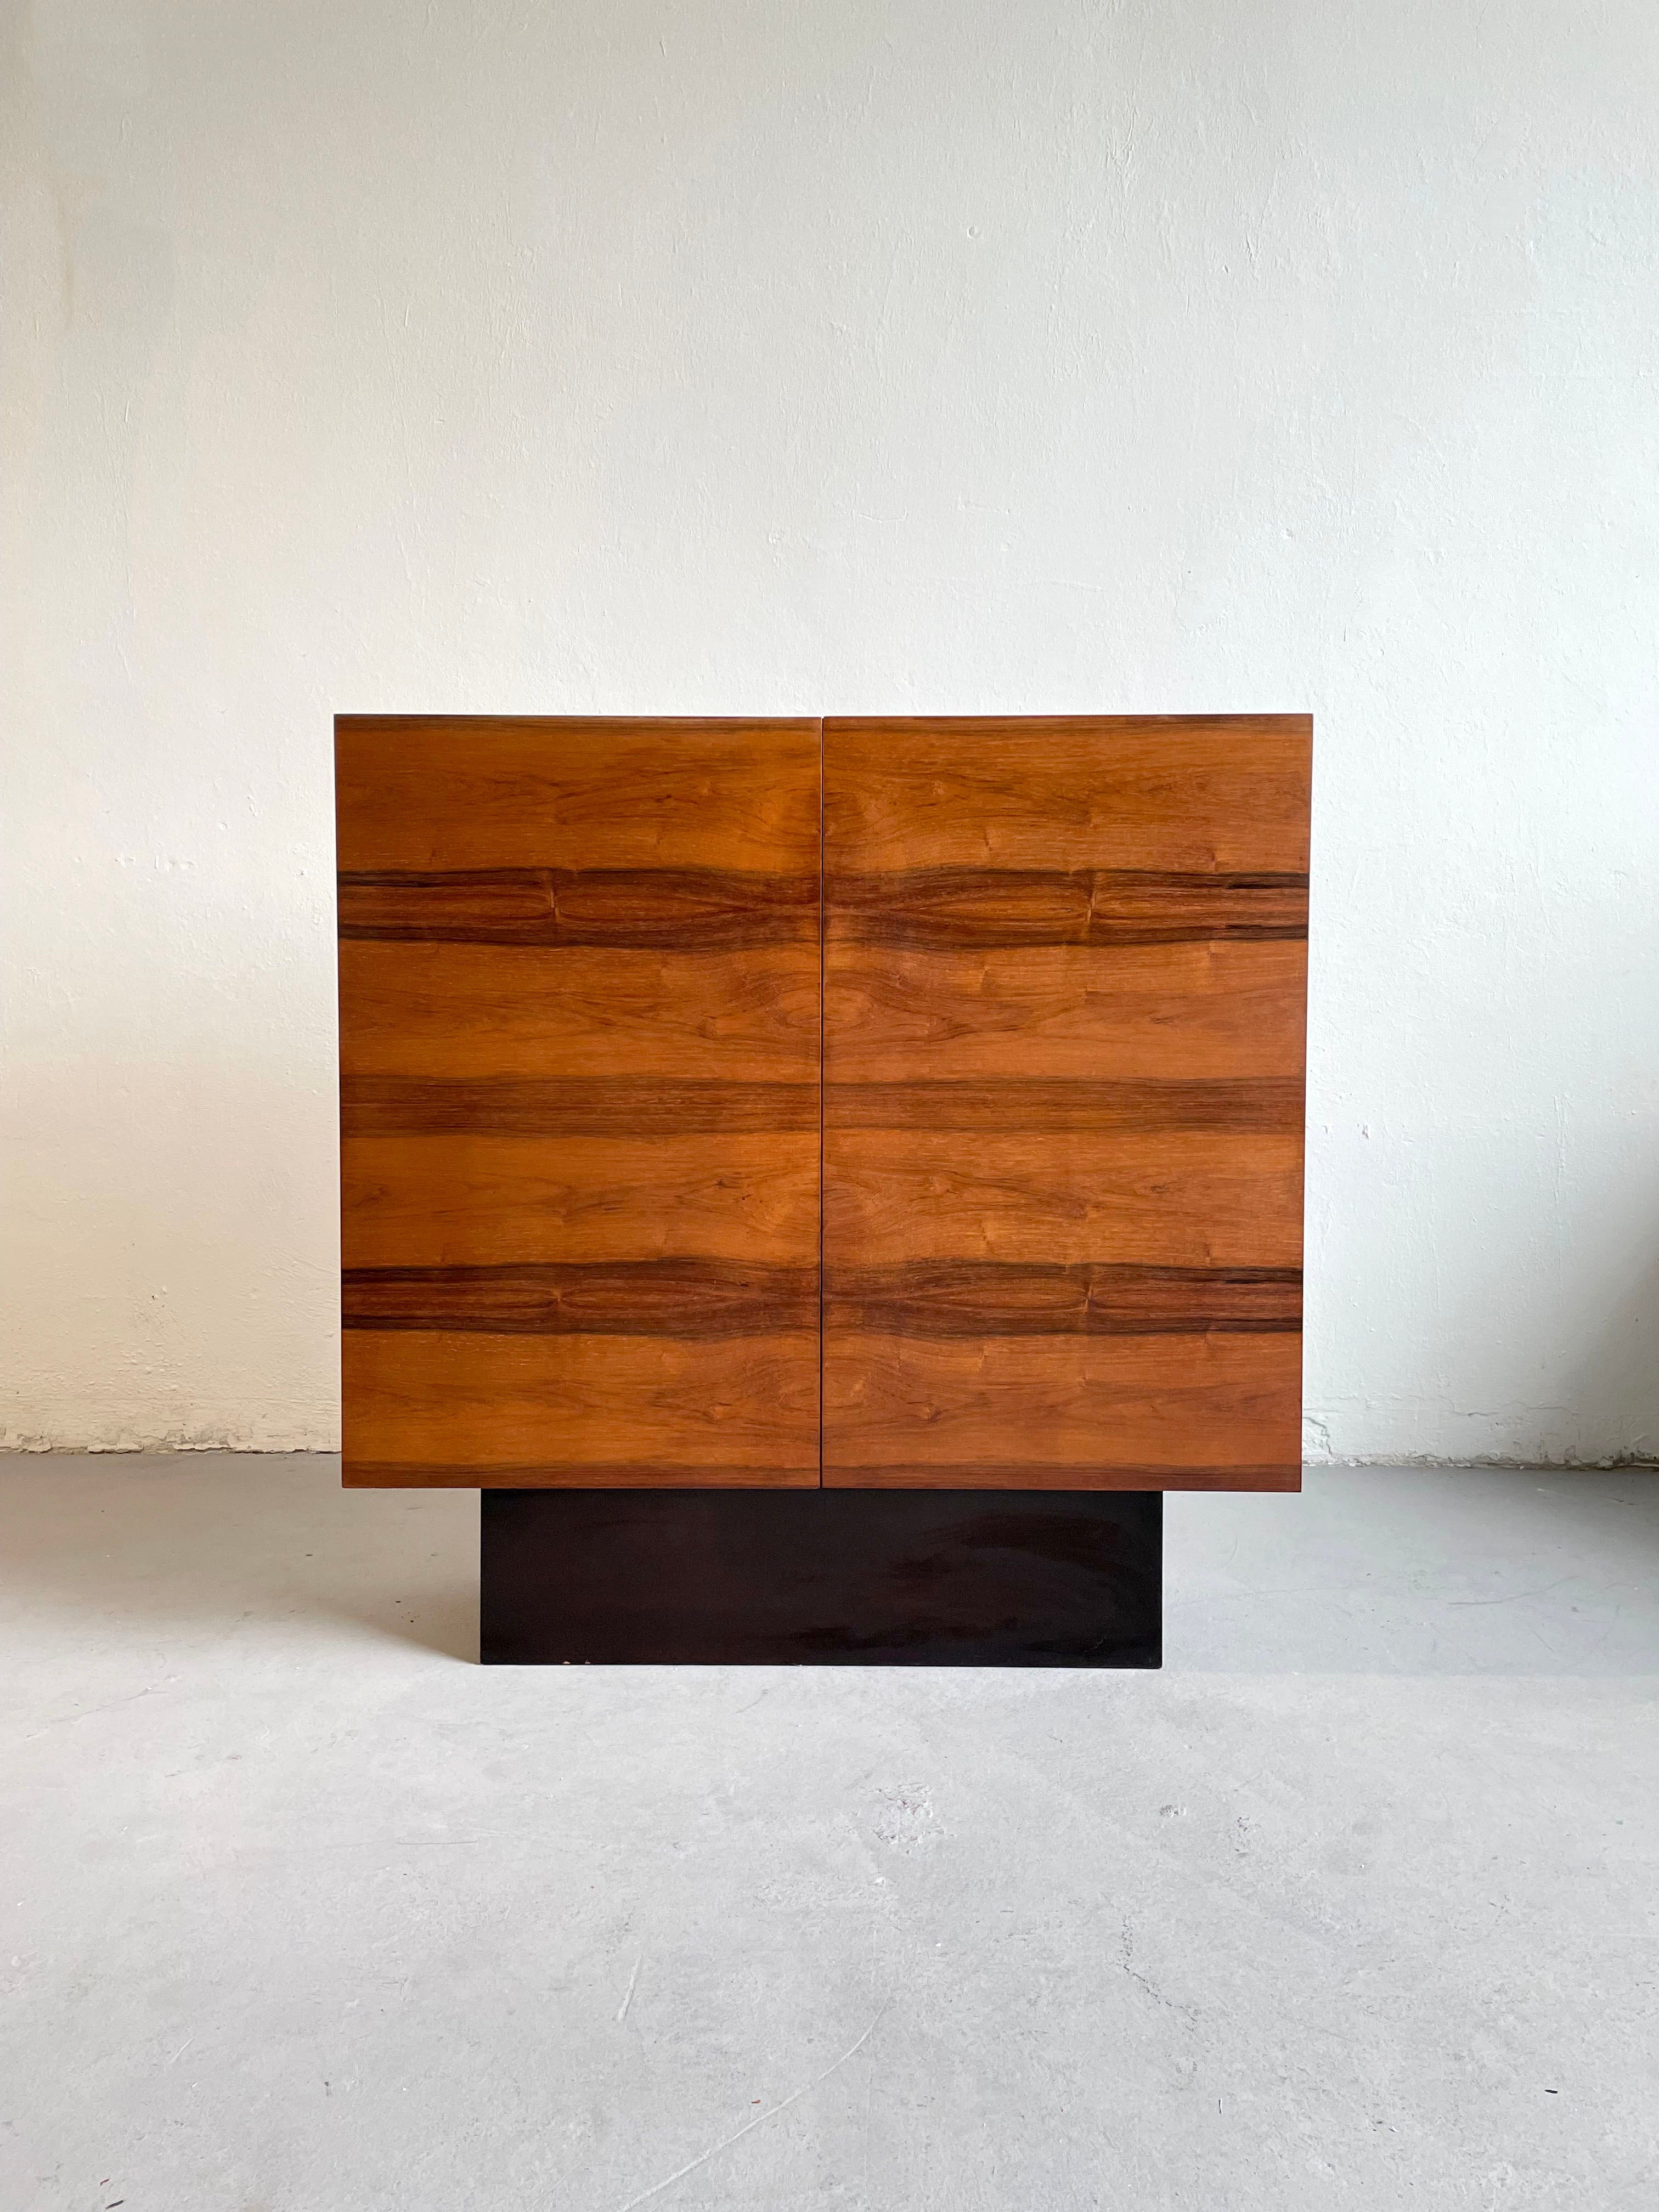 This high-end midcentury cabinet, made of rosewood, is manufactured in Germany in the 1970s.

Very sophisticated timeless Minimalist design that features front door made of rosewood and the glossy black wooden base and frame.
Storage space is